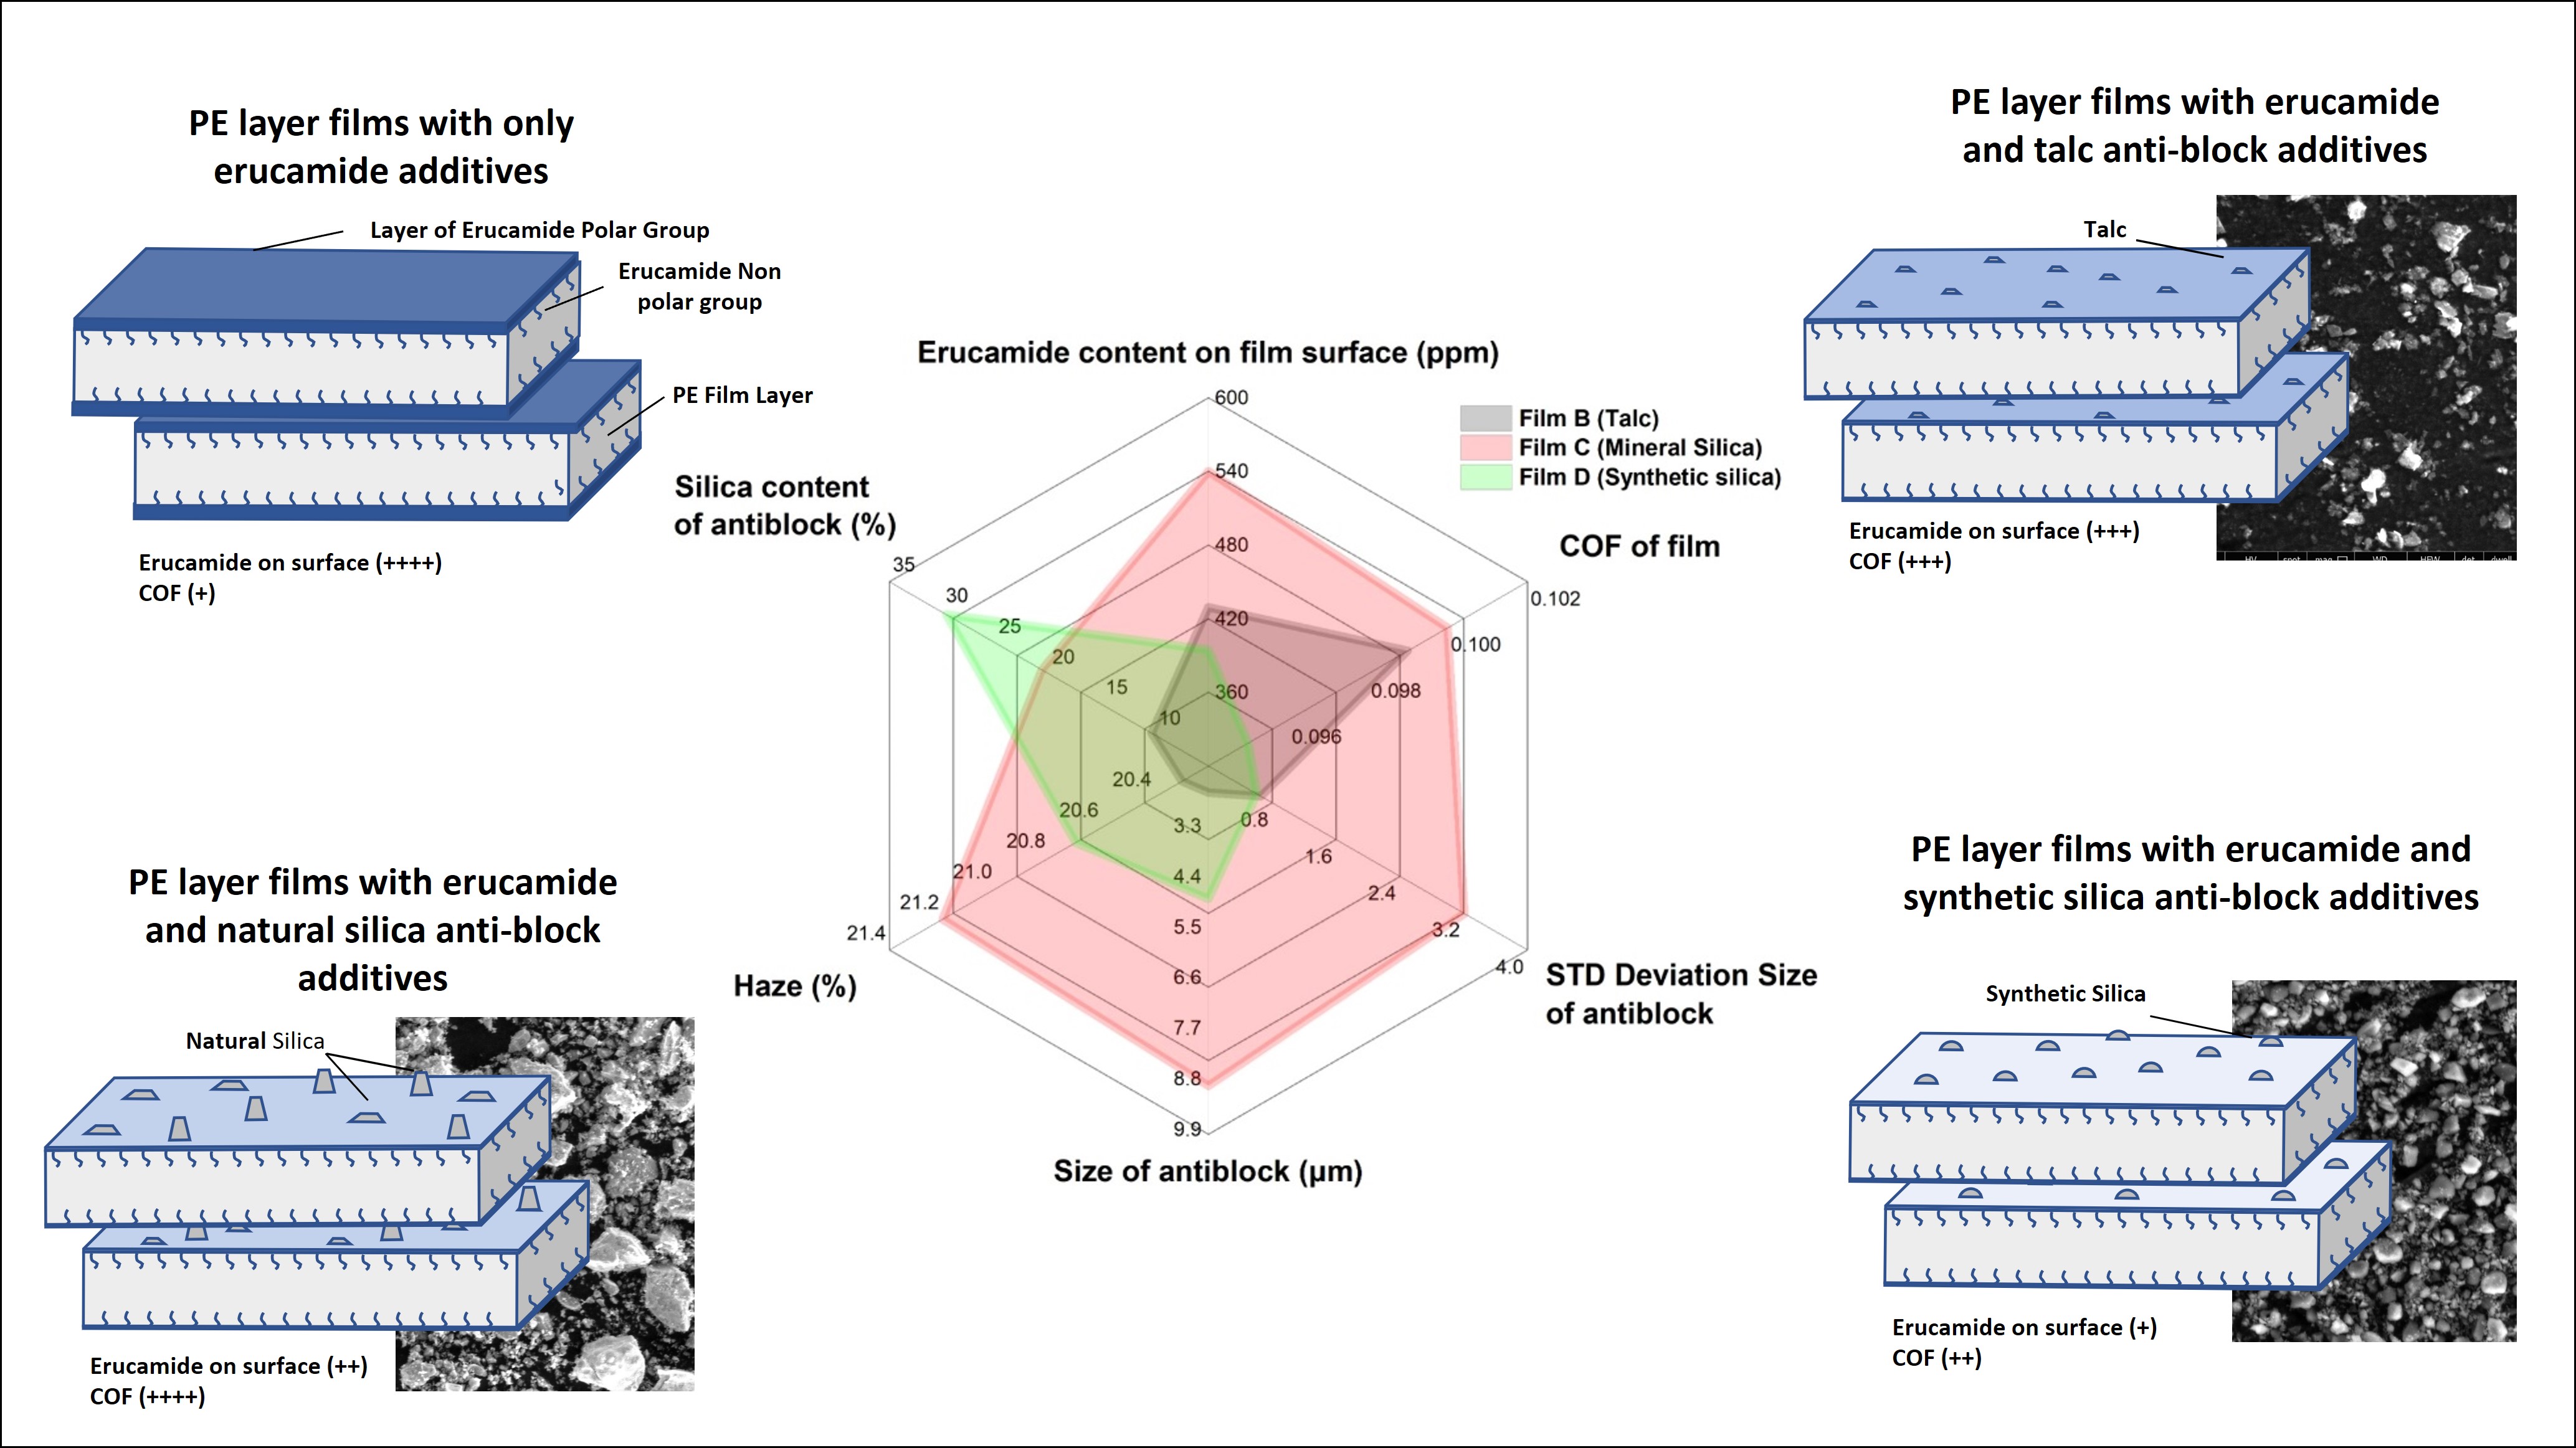 This research aimed to study the performance of different anti-blocks with different shapes, silica content, particle size, and polarity as migration control of erucamide and the effect of its optical and friction properties on the polypropylene film monolayer. The different anti-block was characterized and tested their property as an additive in PE film. The result showed that the smaller particle size and higher silica content on synthetic silica anti-block resulted in better friction properties, which act as an excellent barrier to limit the migration of erucamide onto the film surface